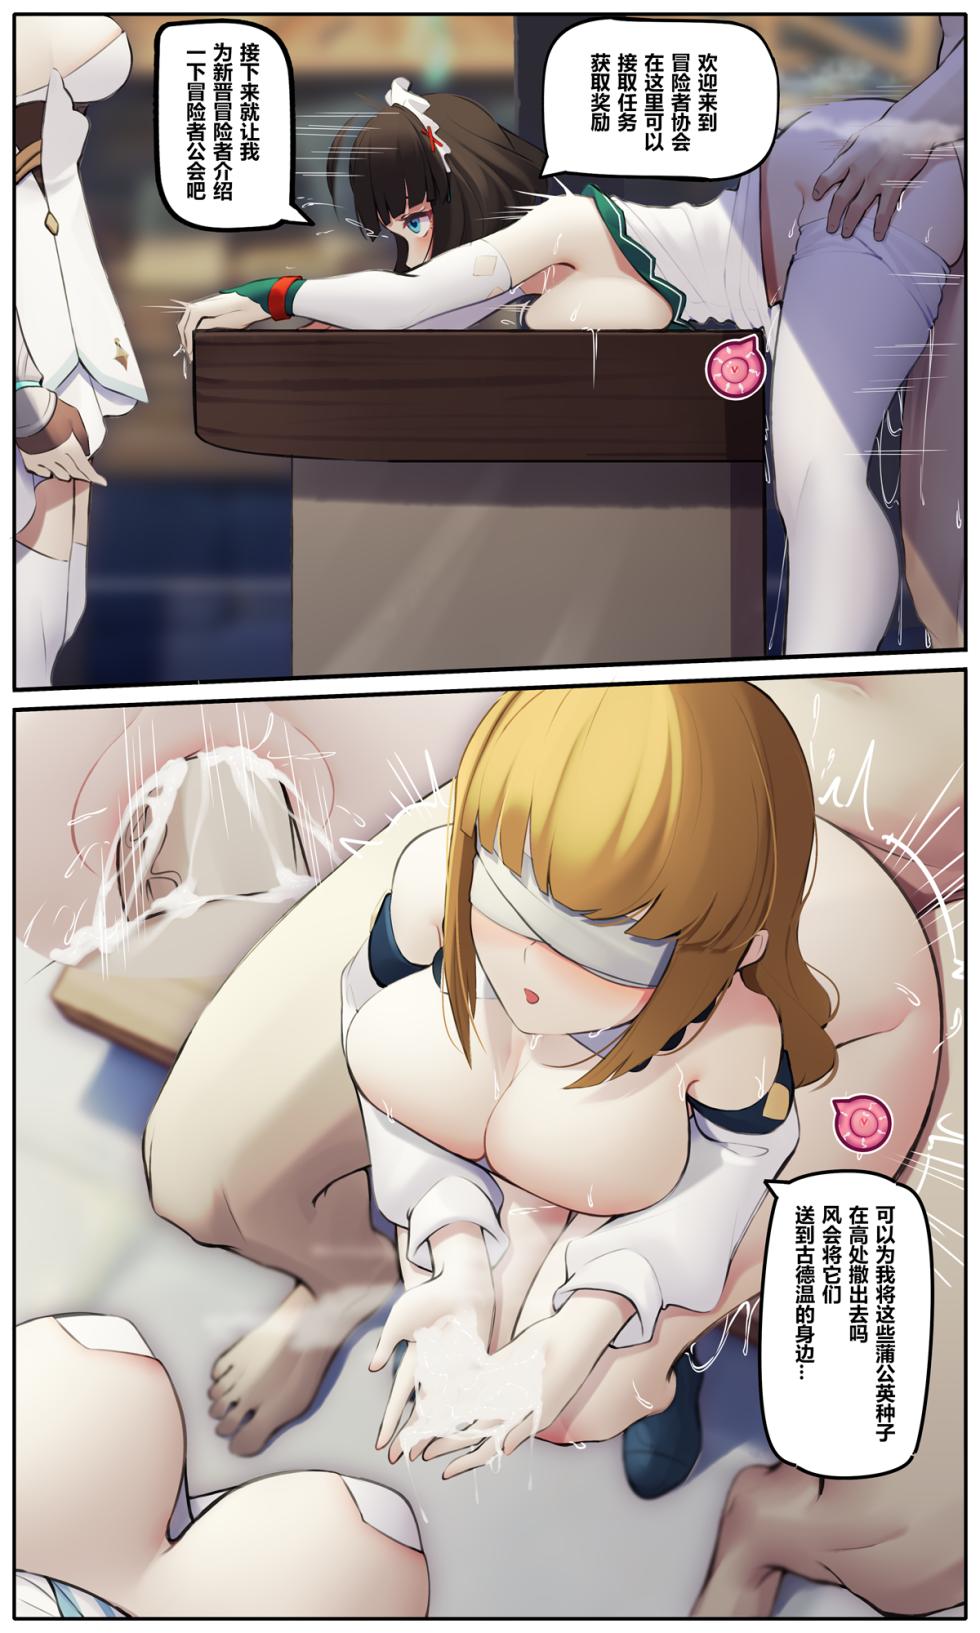 [Azure Ghost] Gadgets θ 03 (Genshin Impact) [Chinese] [Decensored] - Page 14